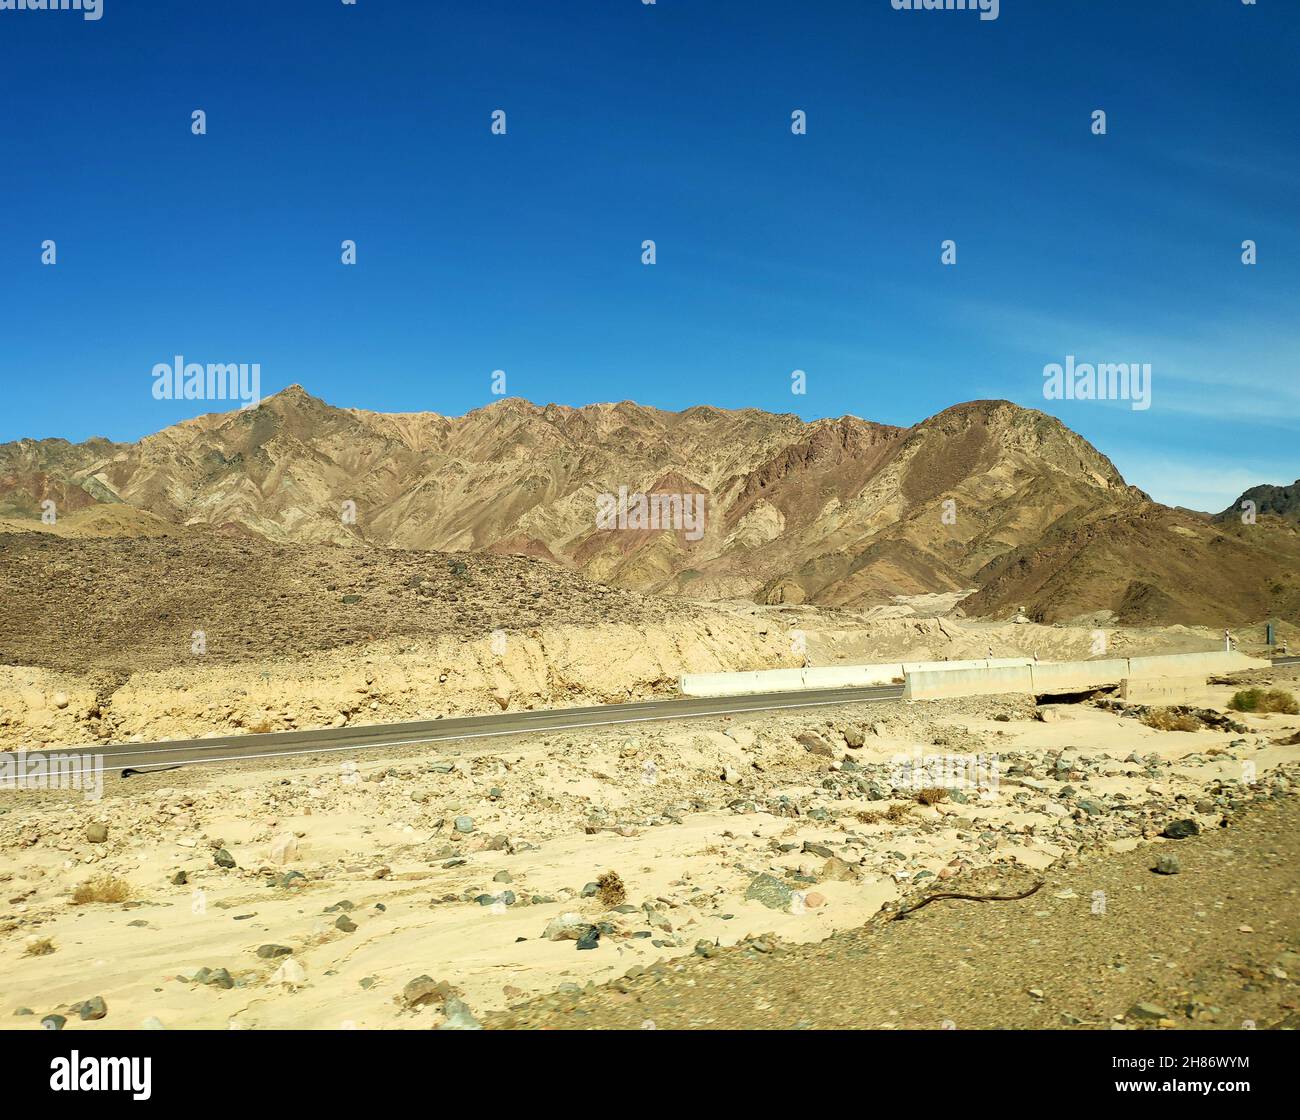 Bridge in the Sinai desert, picturesque background with mountains and hills, desert landscape wallpaper Stock Photo